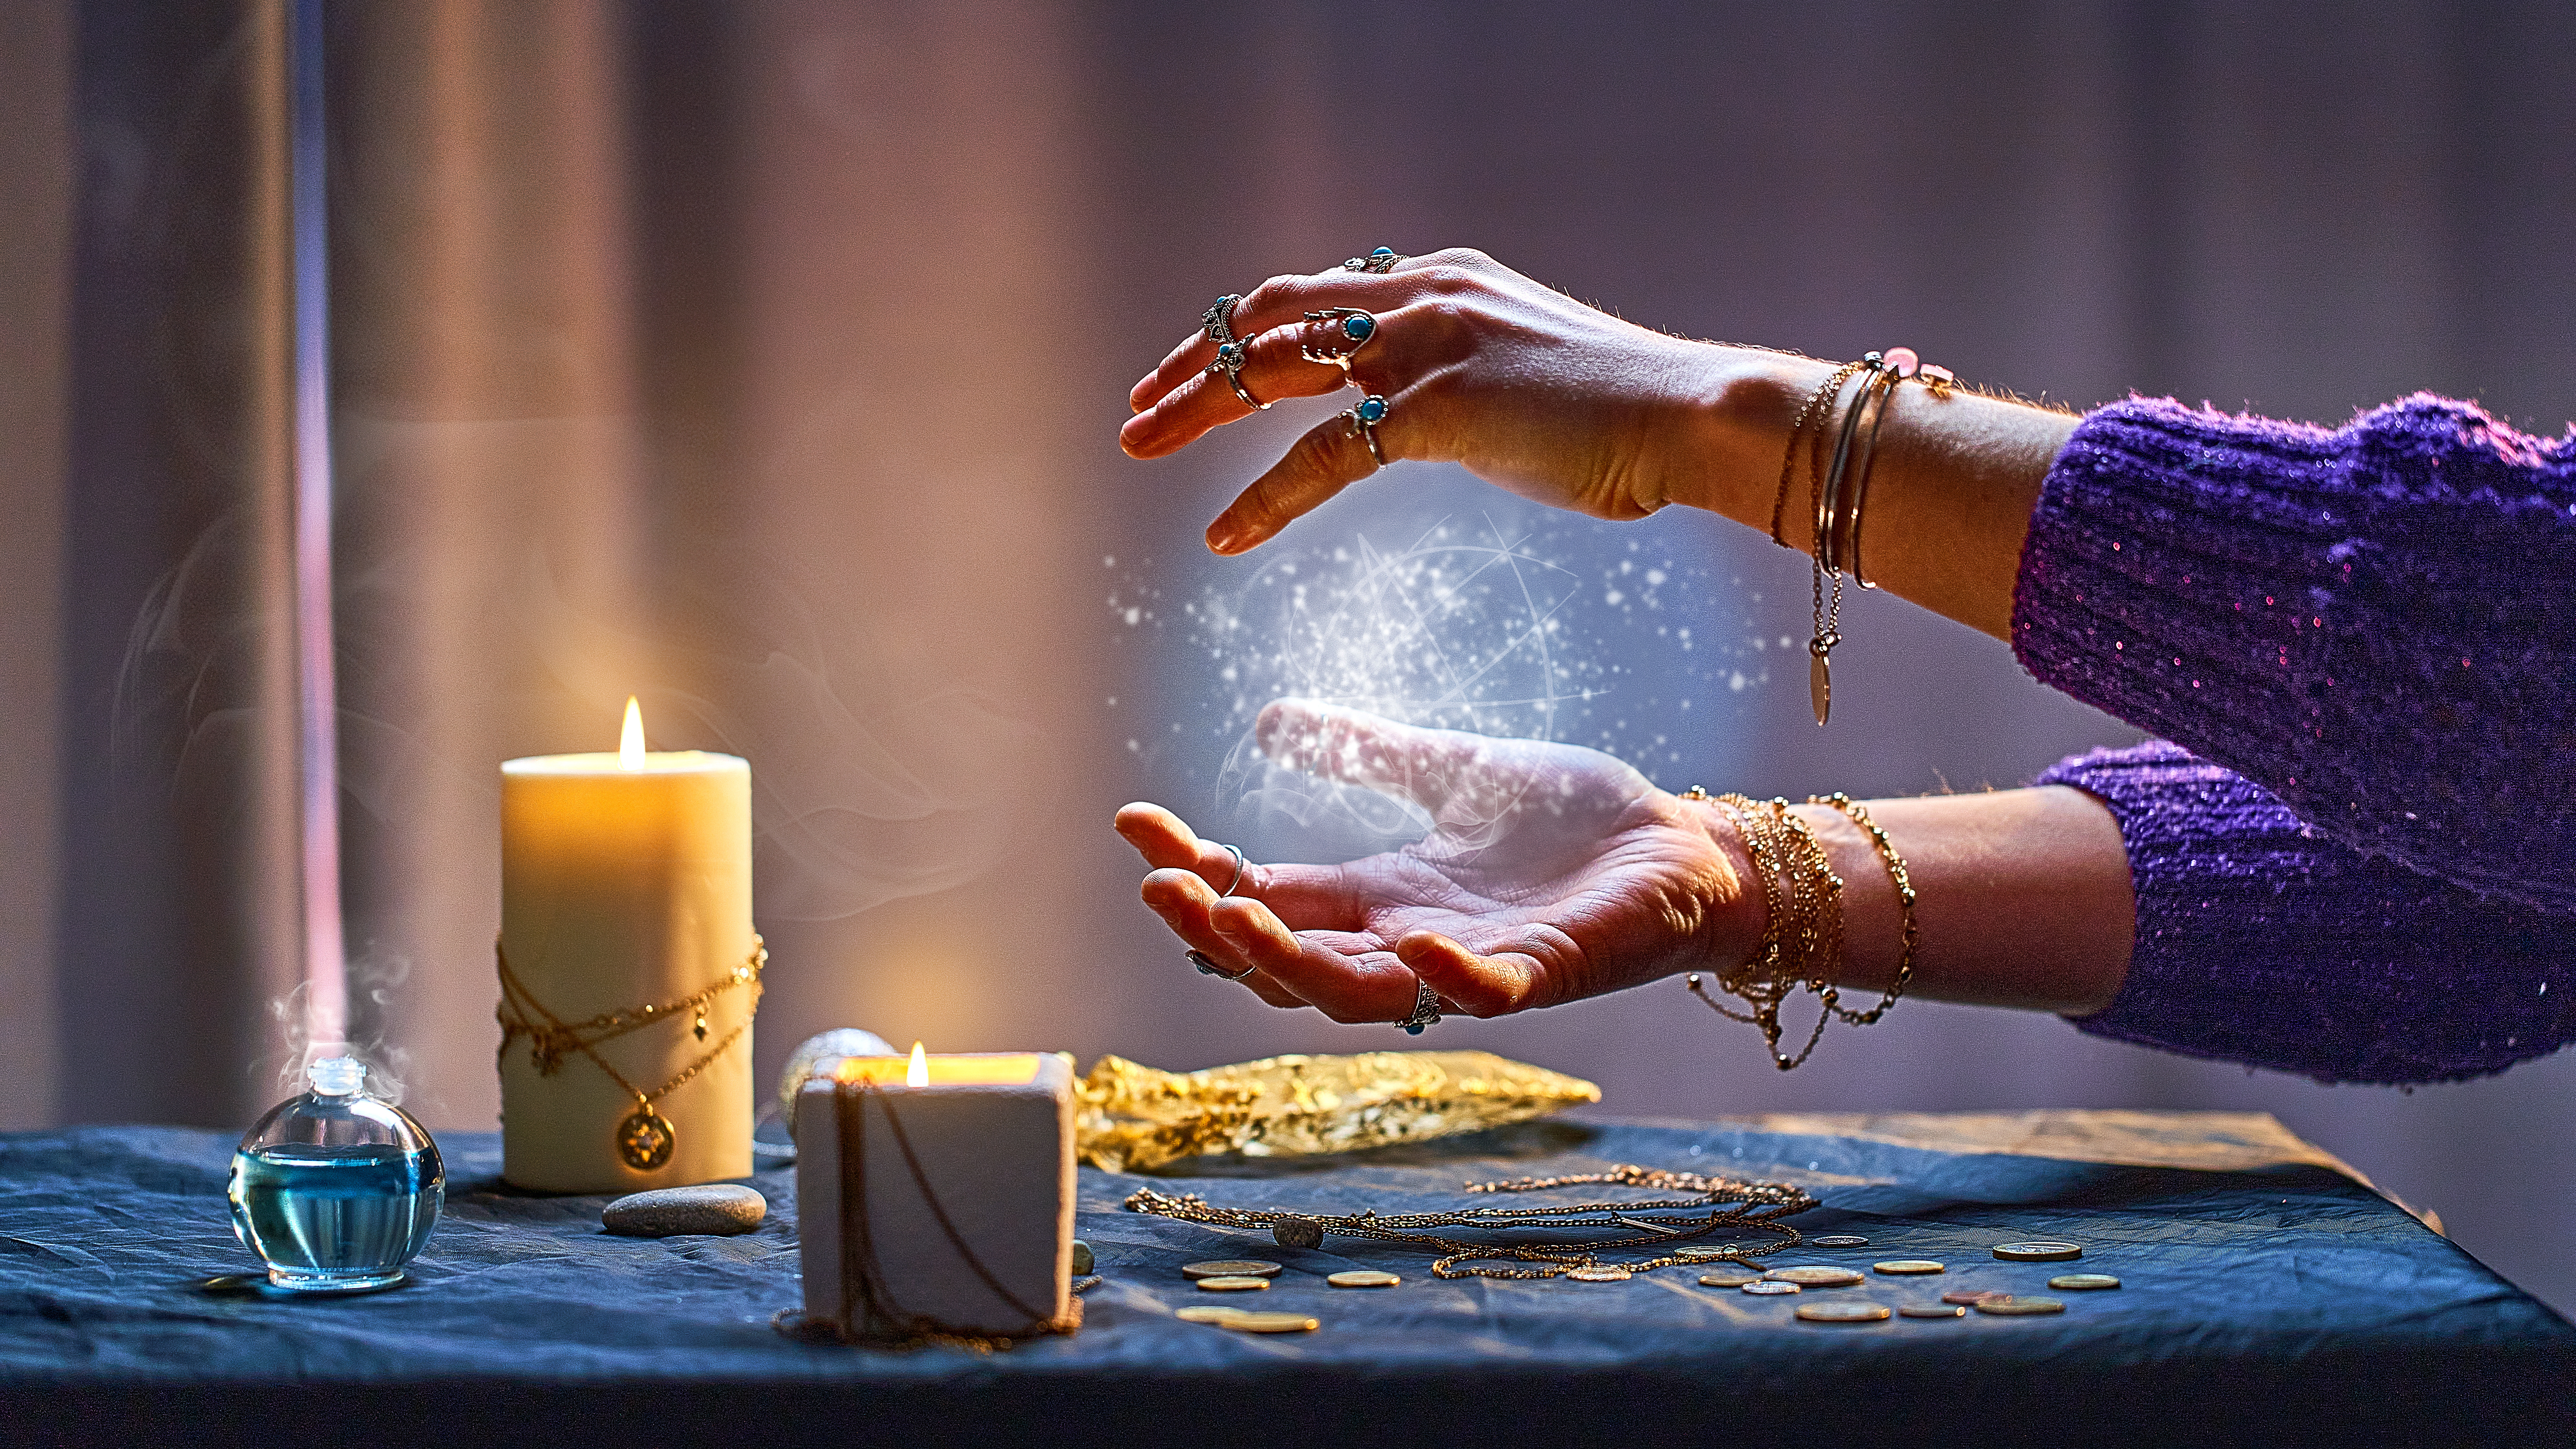 Know before you go: check out these tips to prepare for your psychic reading.